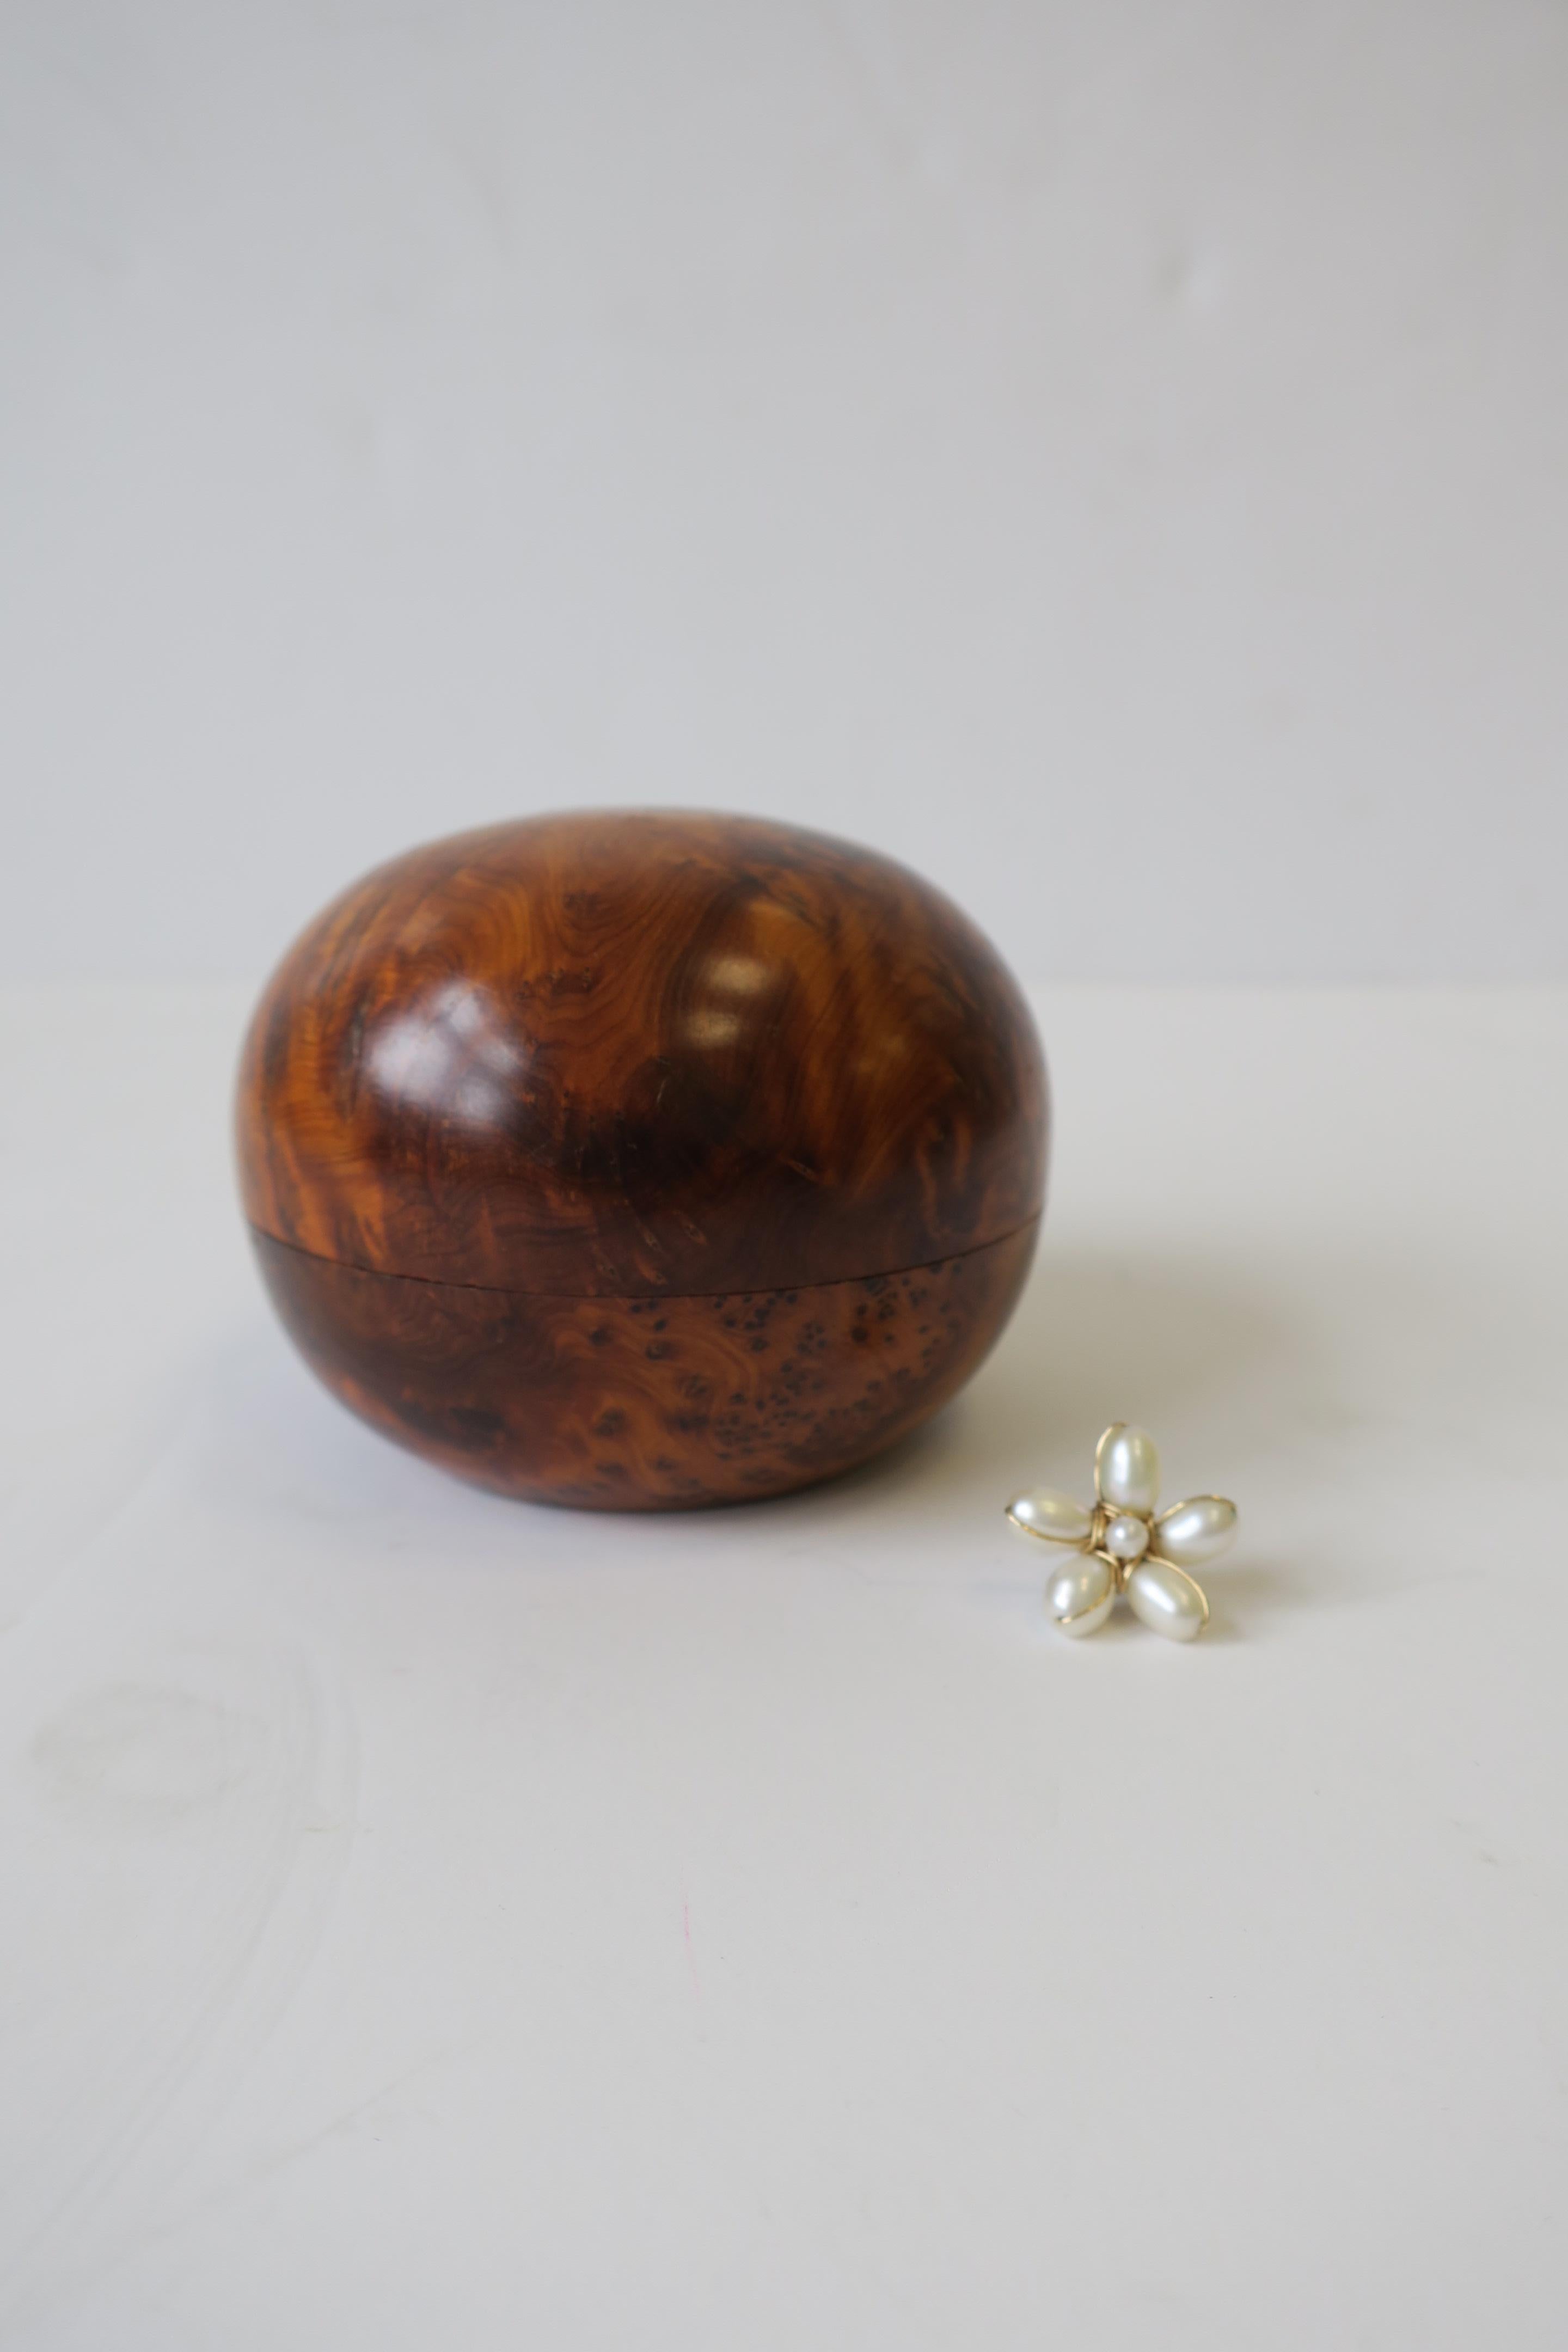 Burl Wood Trinket or Jewelry Box In Excellent Condition For Sale In New York, NY